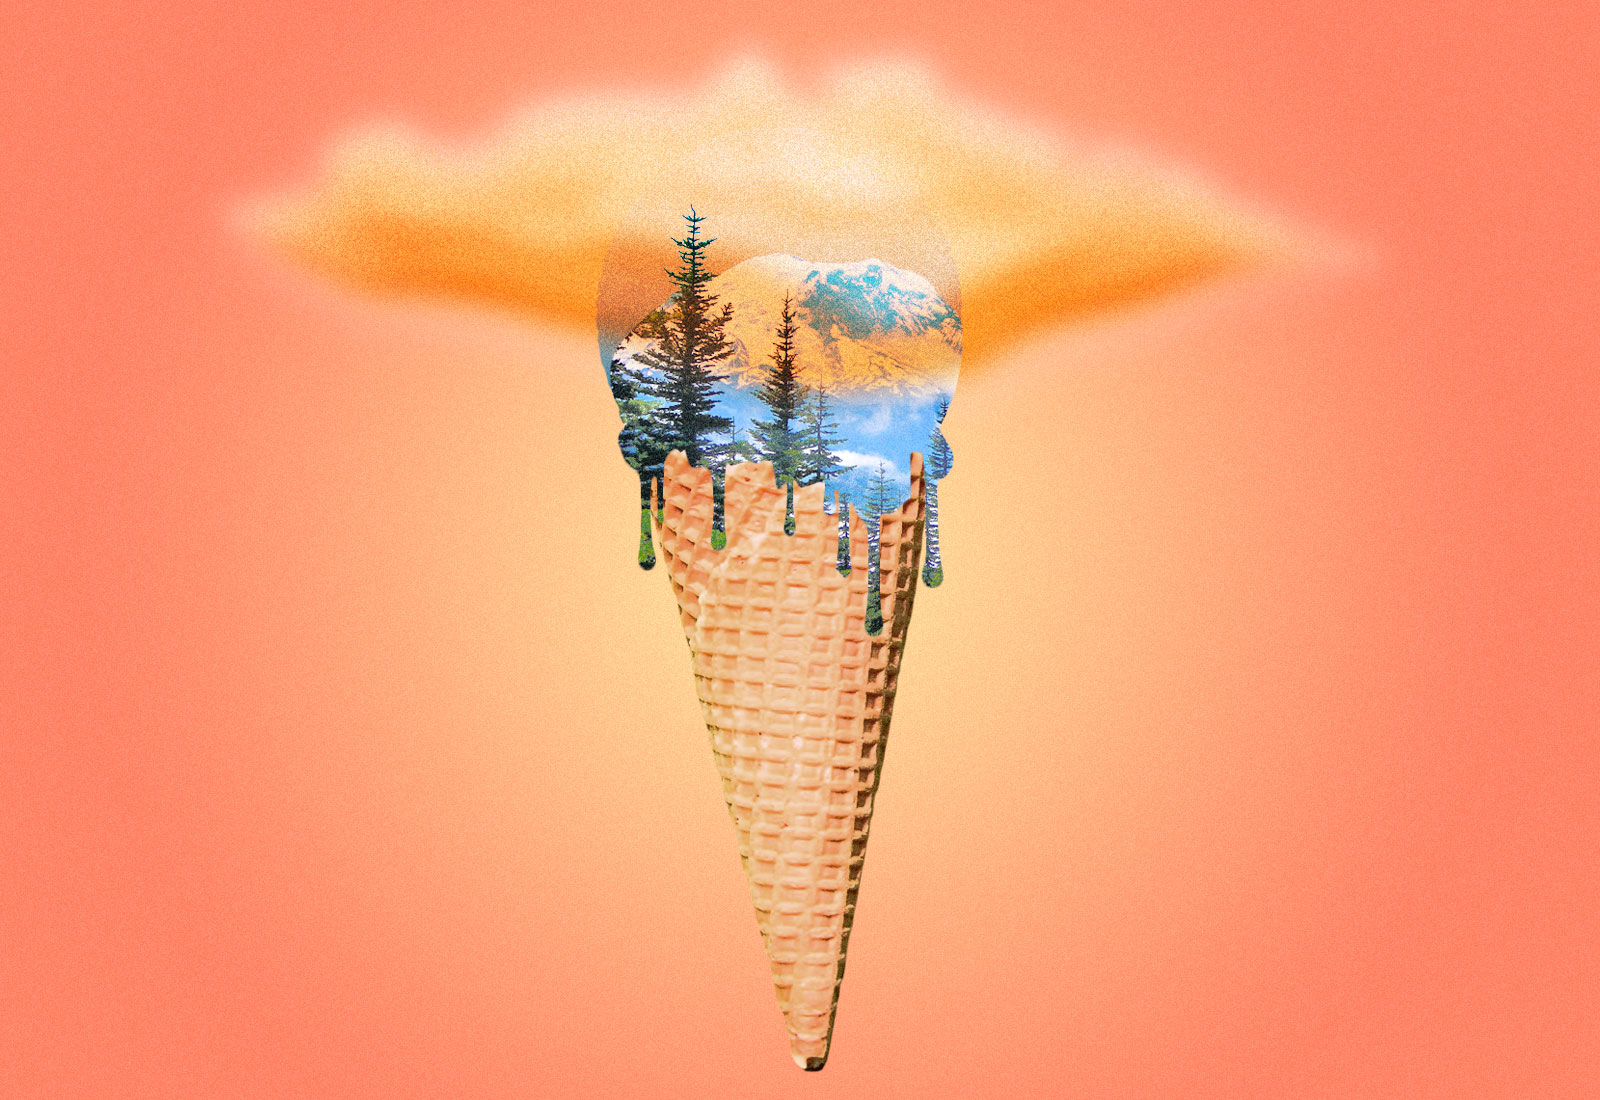 Collage: A mountain and trees as a scoop of melting ice cream with a hovering cloud on top